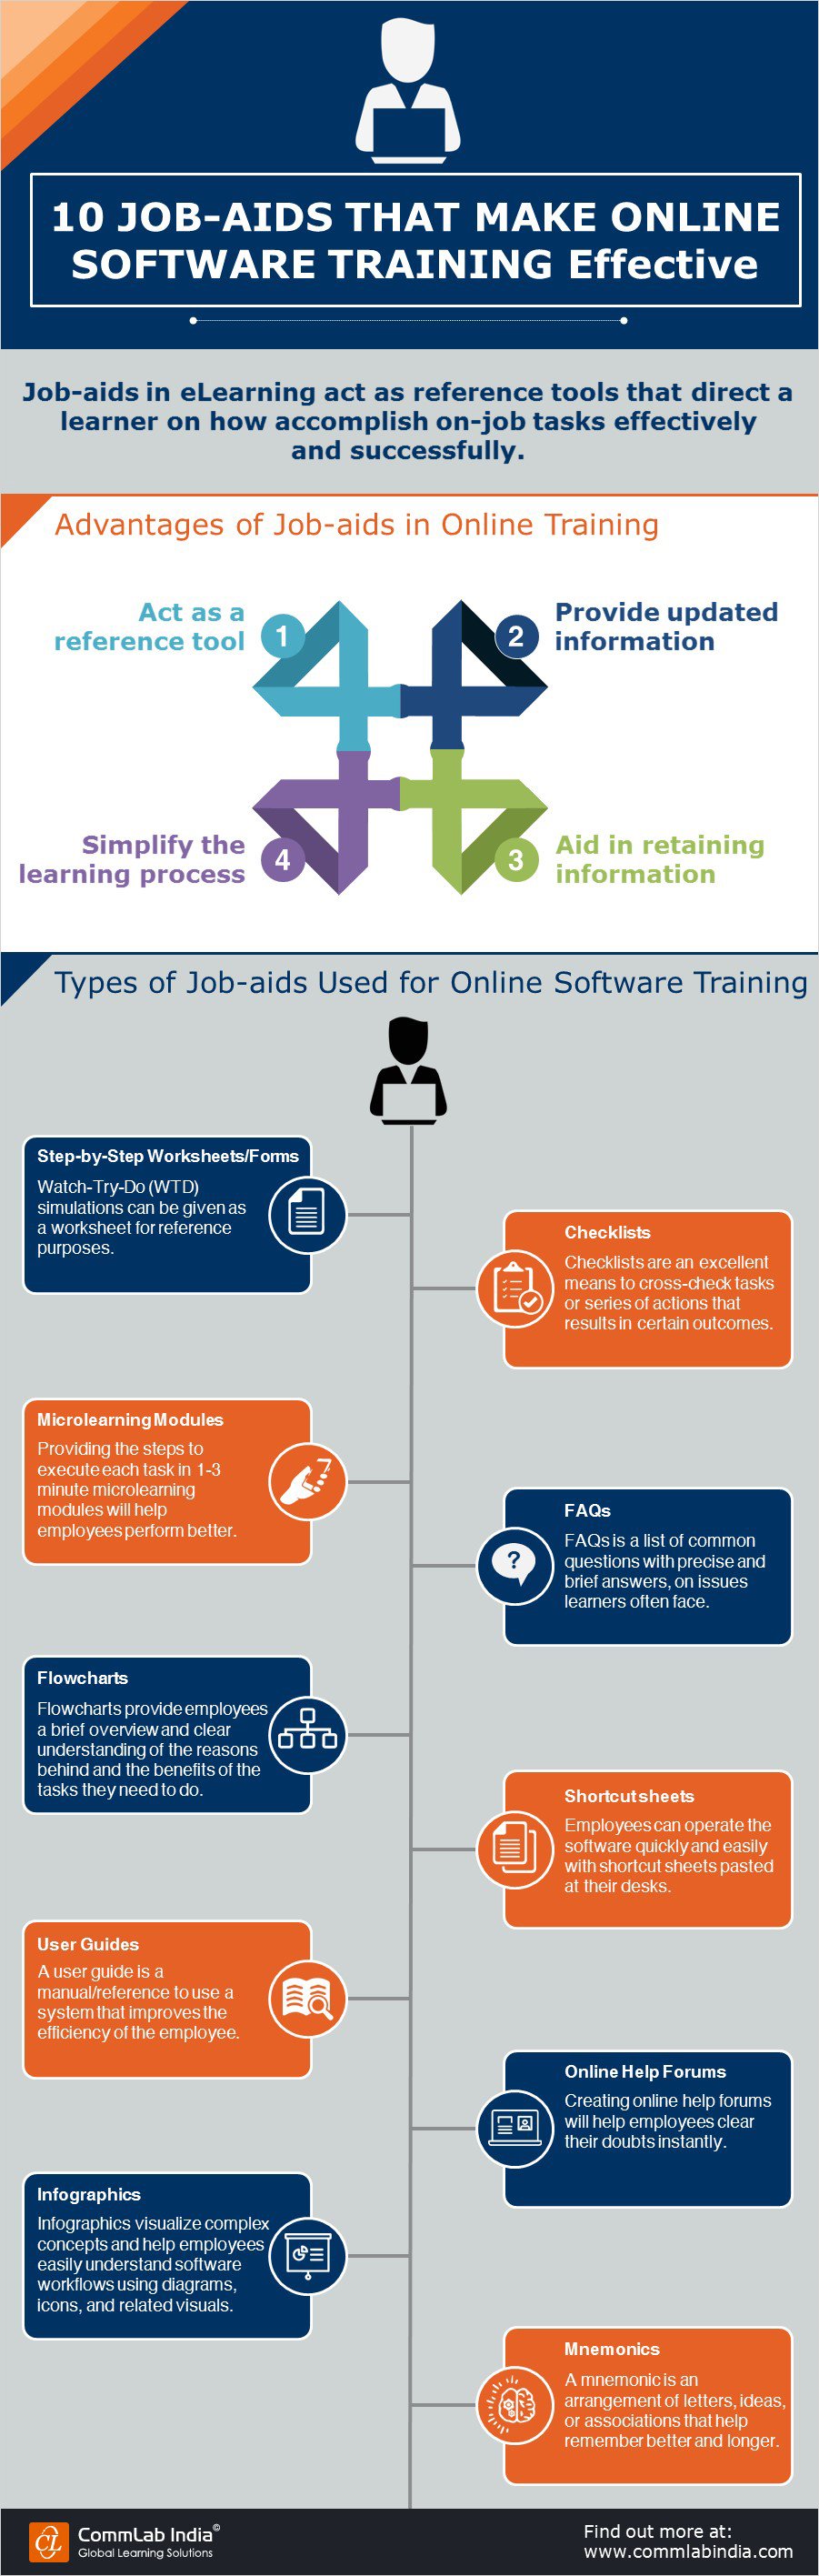 10 Job-Aids That Make Online Software Training Handy [Infographic]